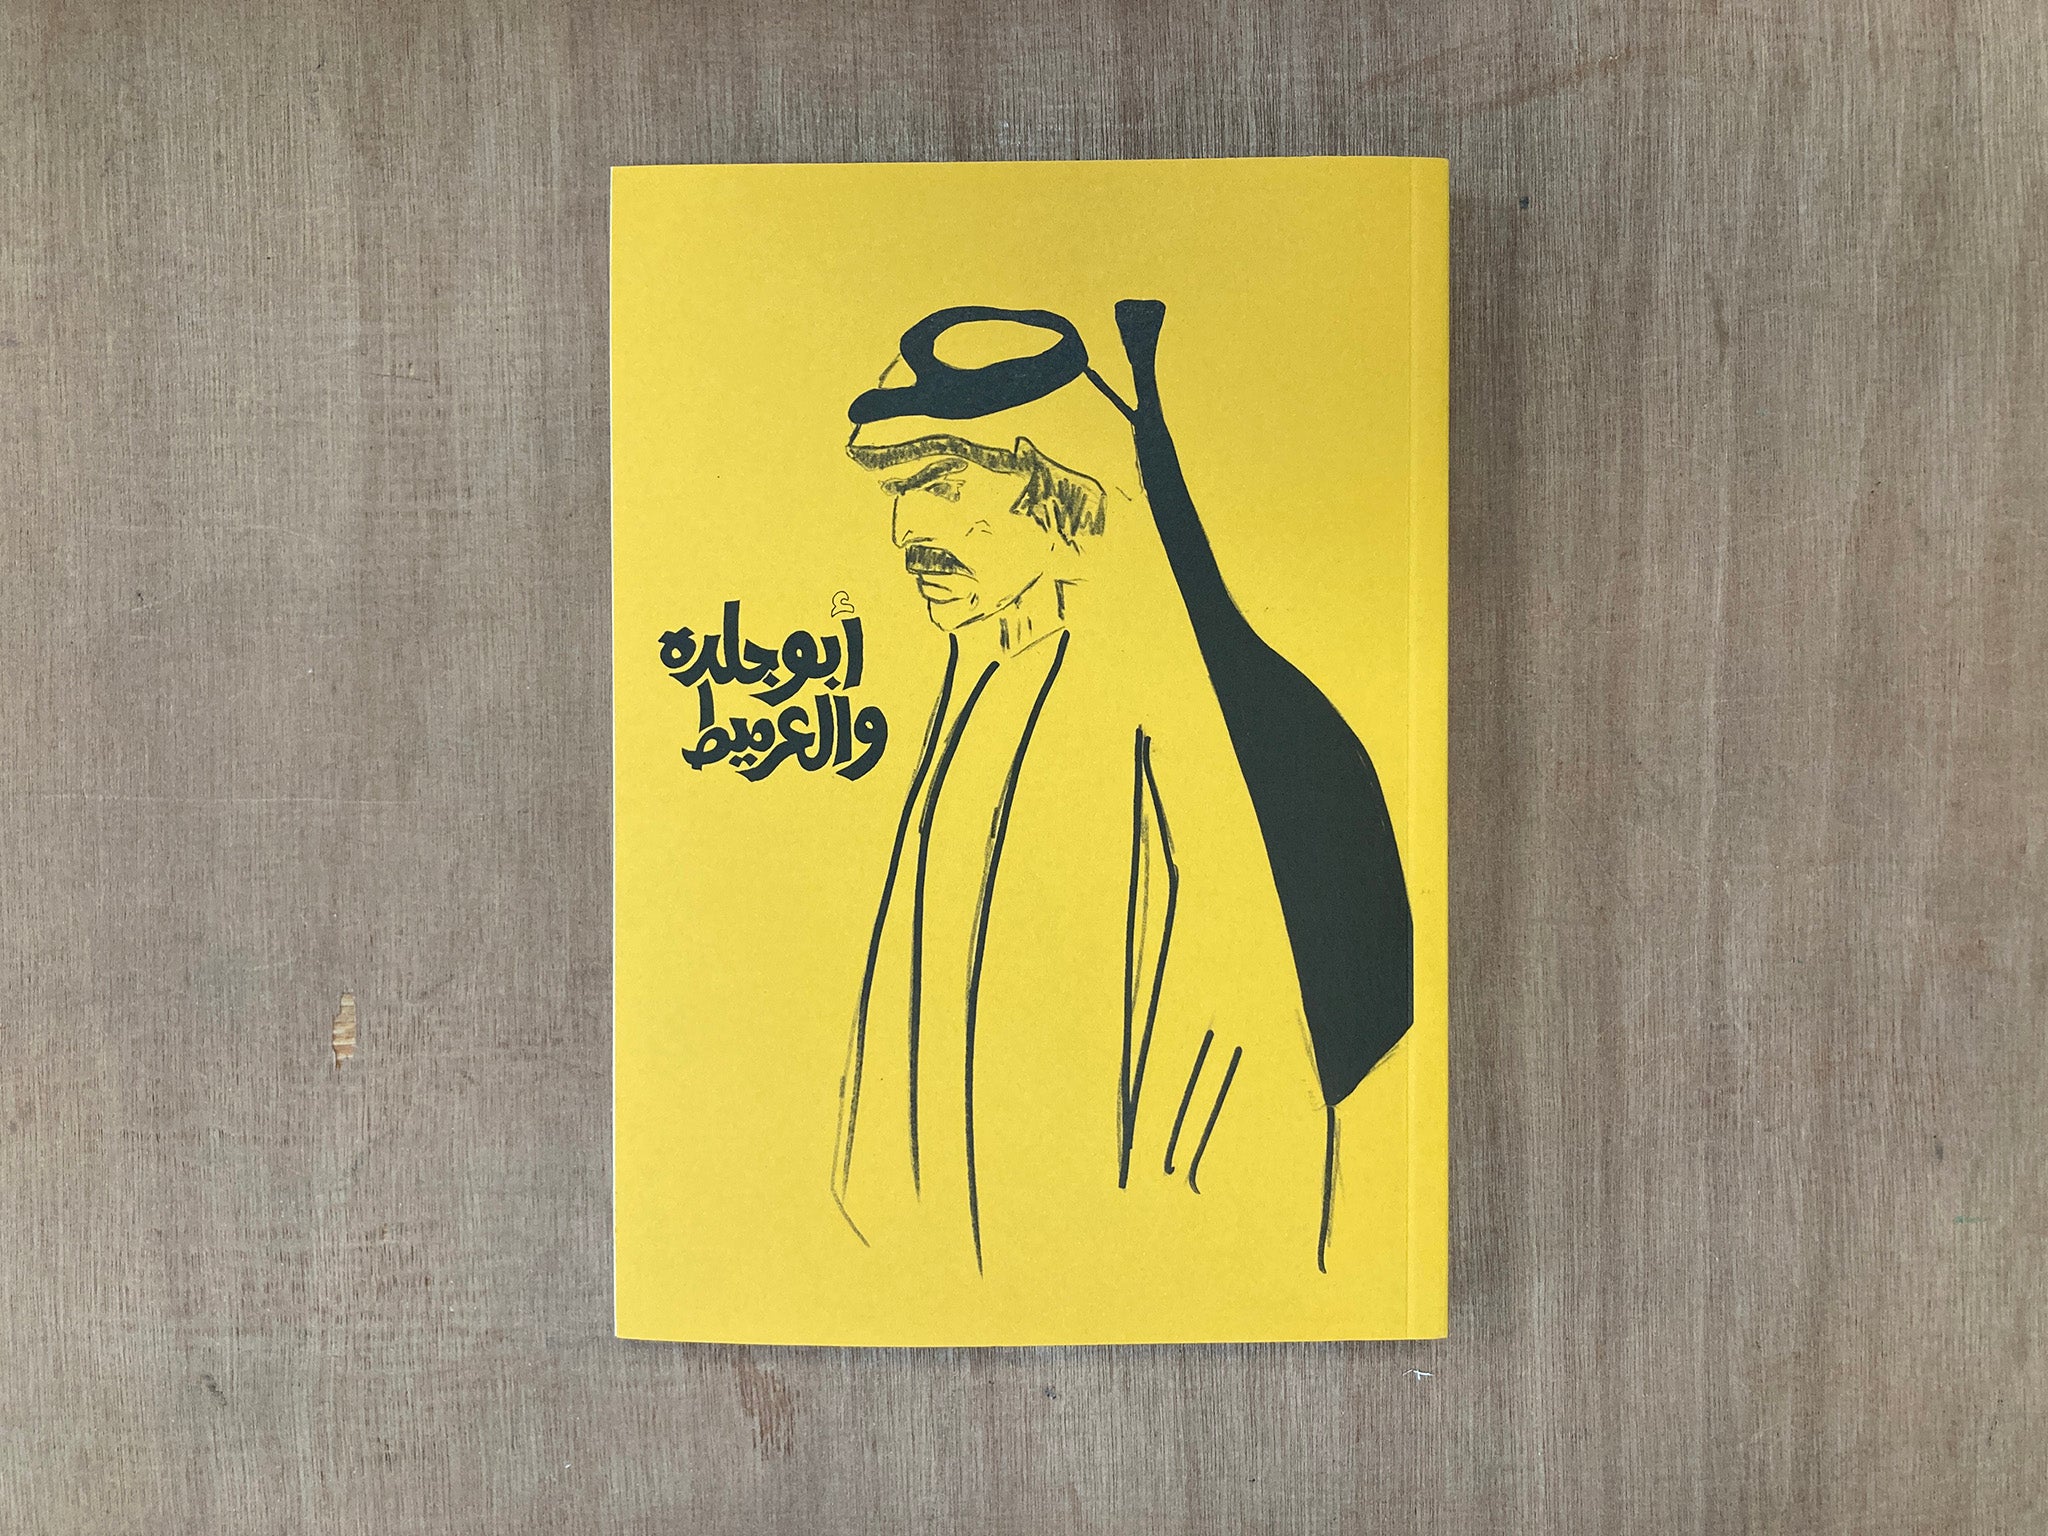 ABU JILDEH AND AL-ARMEET by Ma'touq Collective